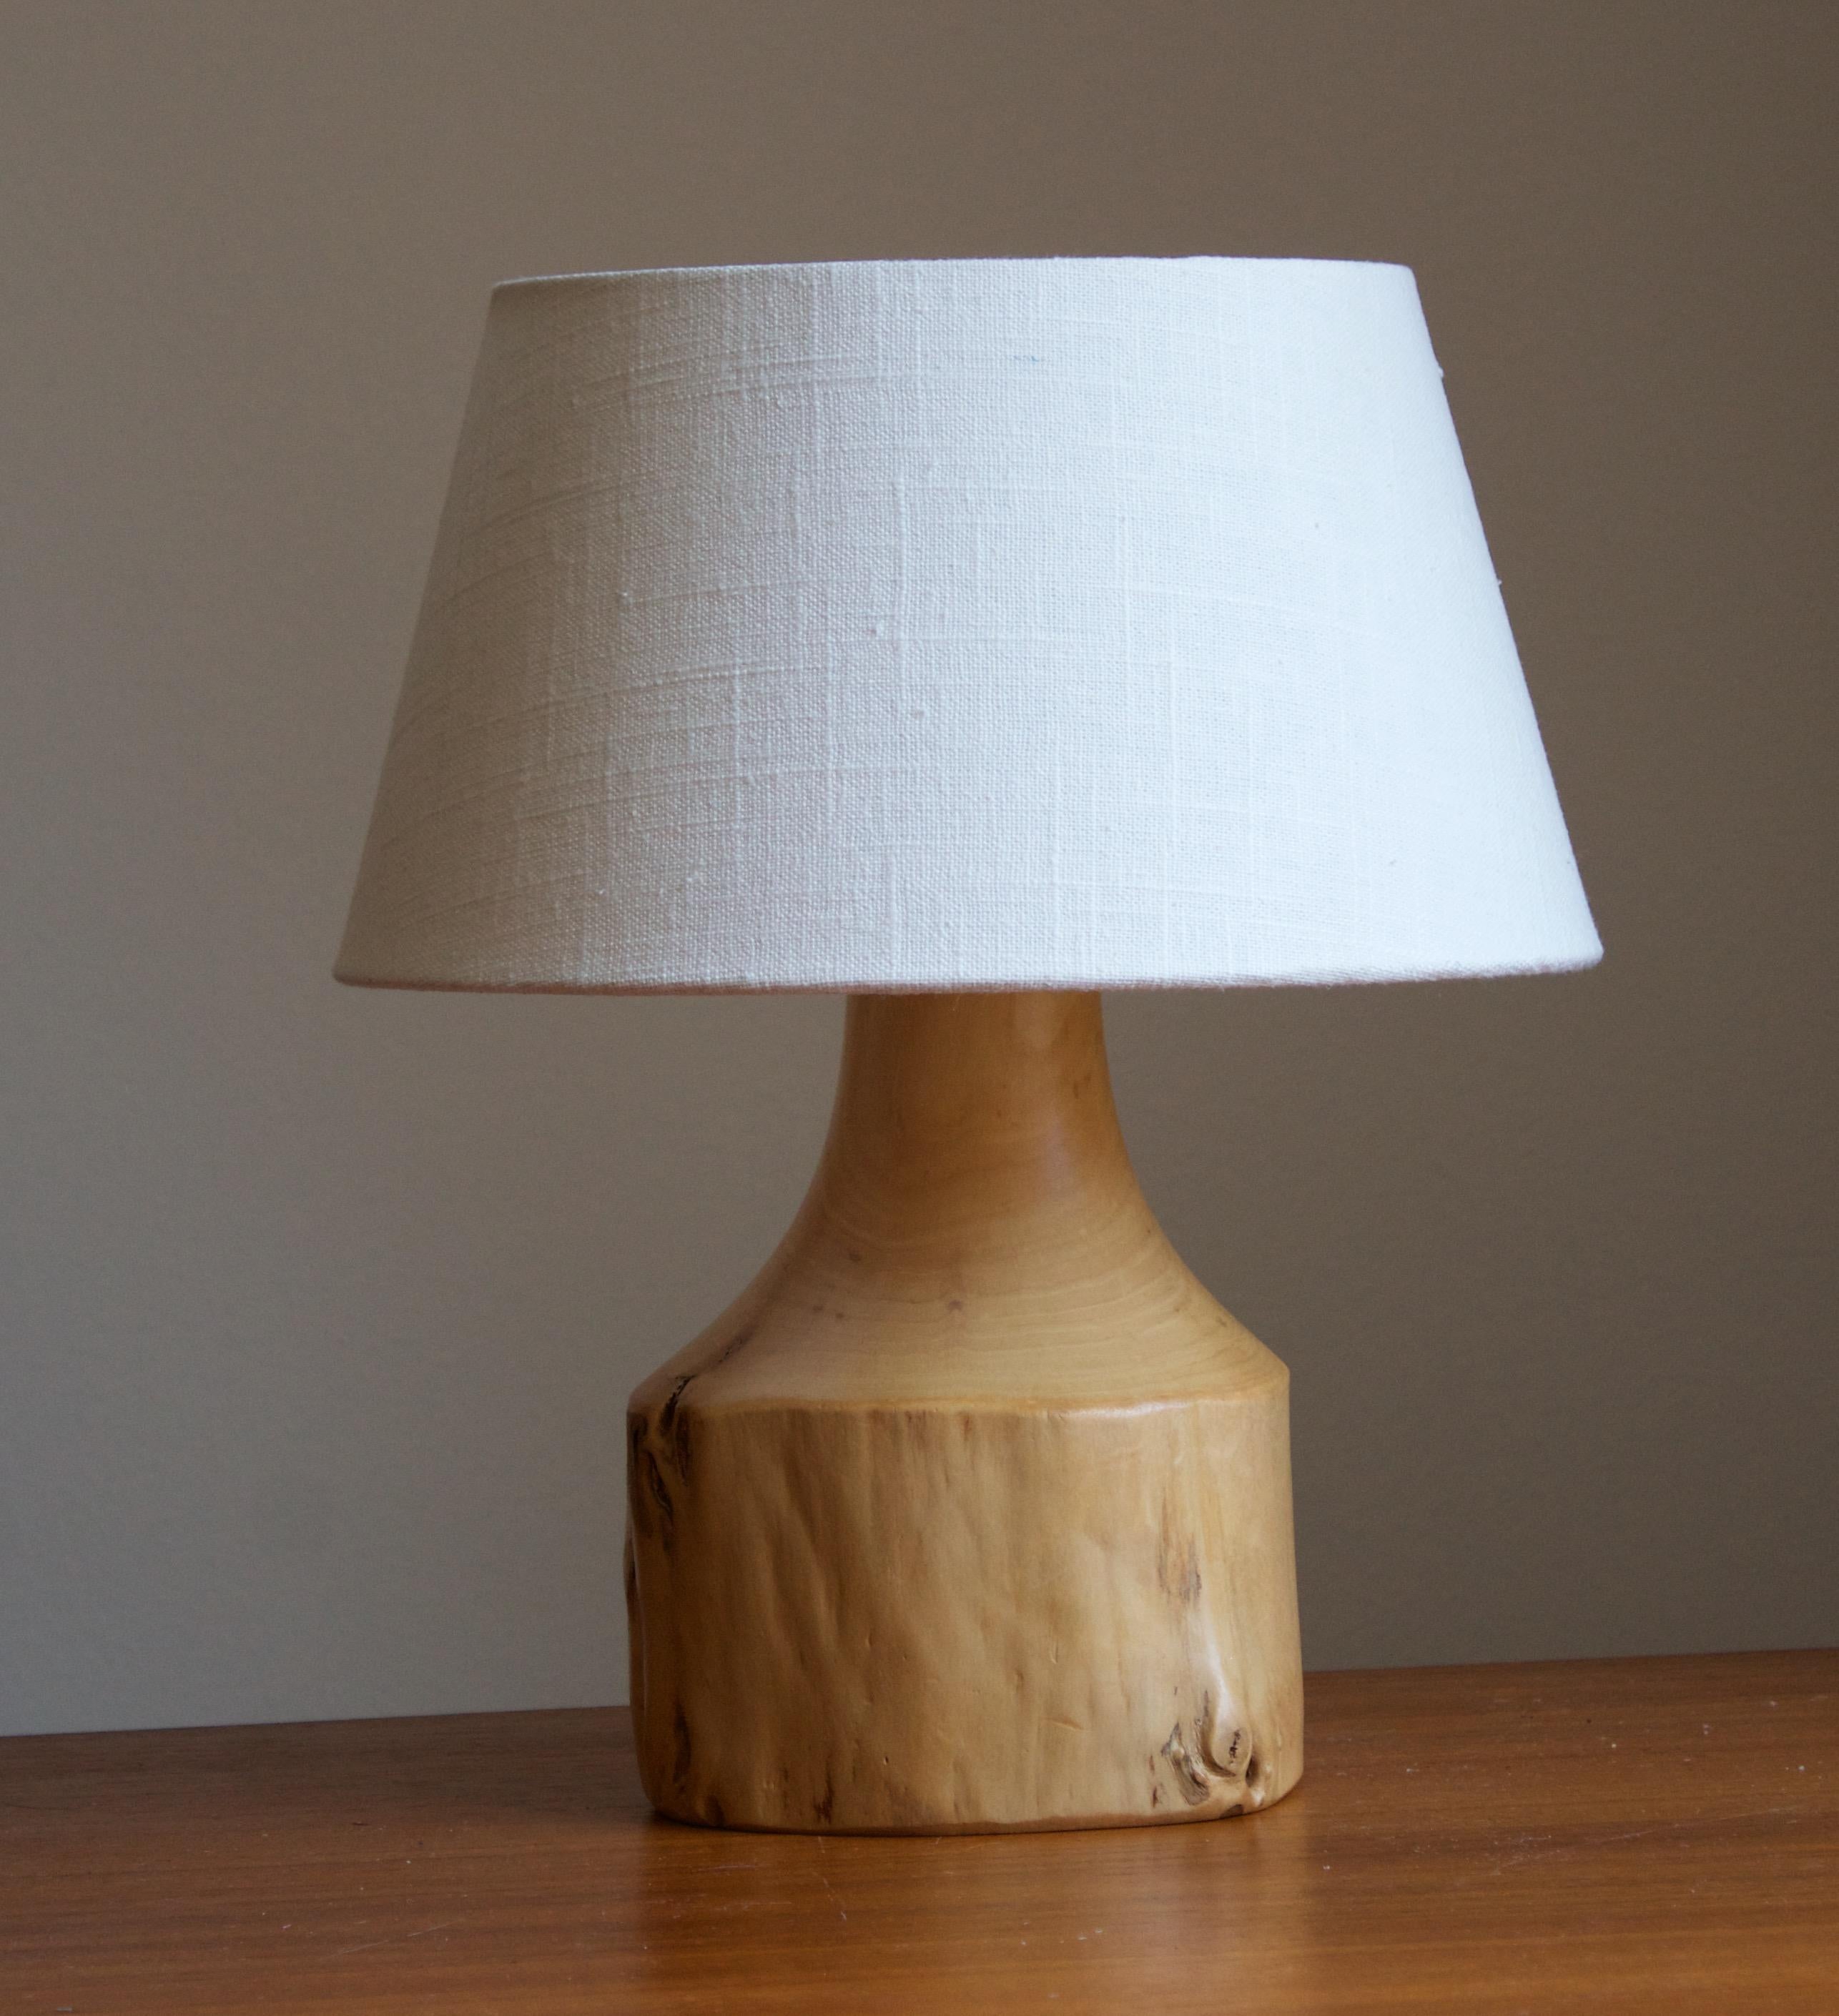 A table lamp. Designed and produced by Sigvard Nilsson for his own studio, Söwe Konst, Sweden, c. 1970s. Signed.

In solid cottonwood.

Sold without lampshade, stated dimensions exclude lampshade.